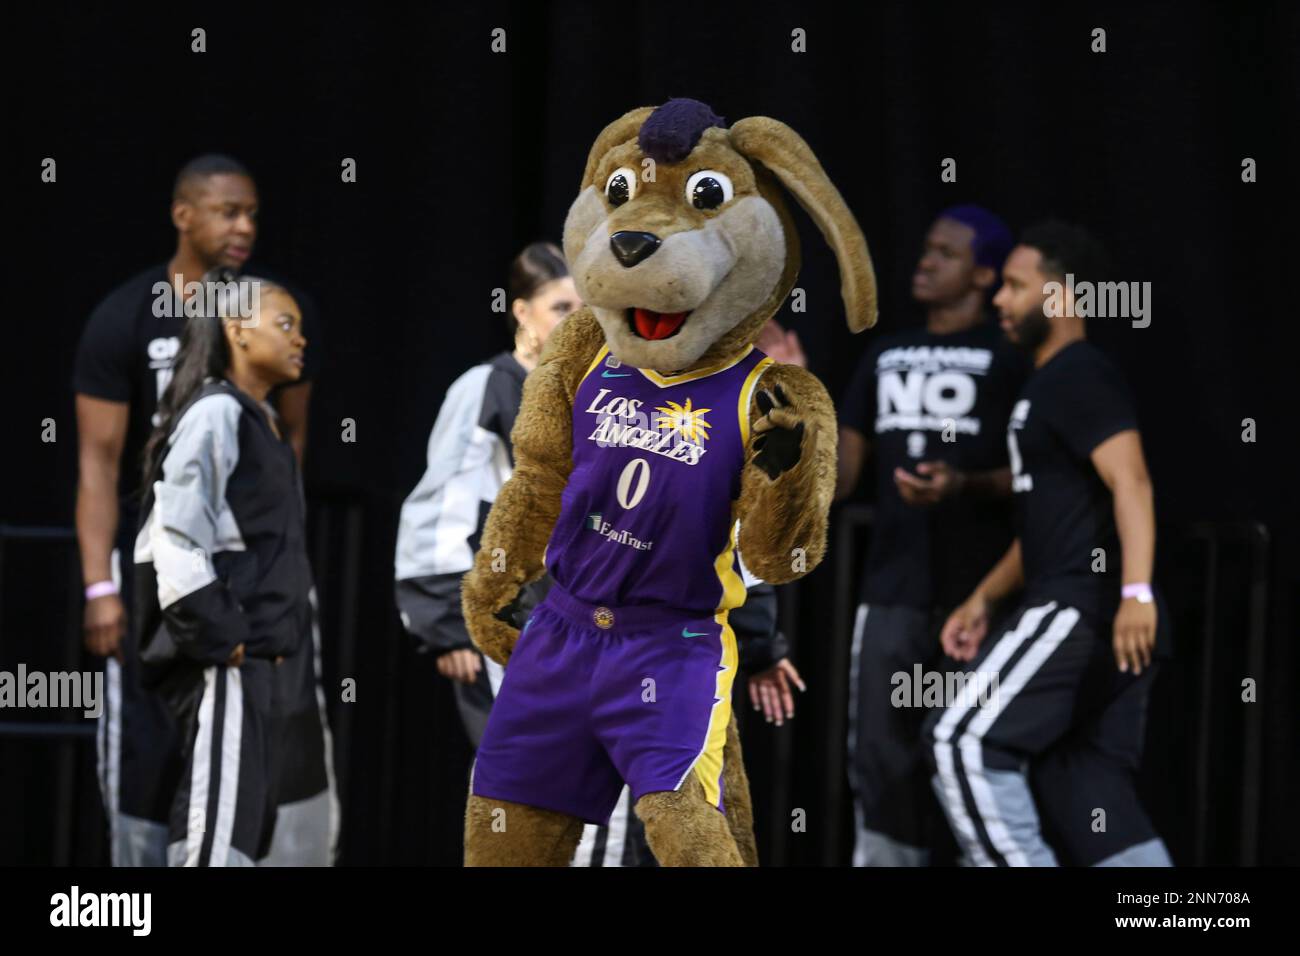 Los Angeles Sparks mascot Sparky during the Connecticut Sun vs Los